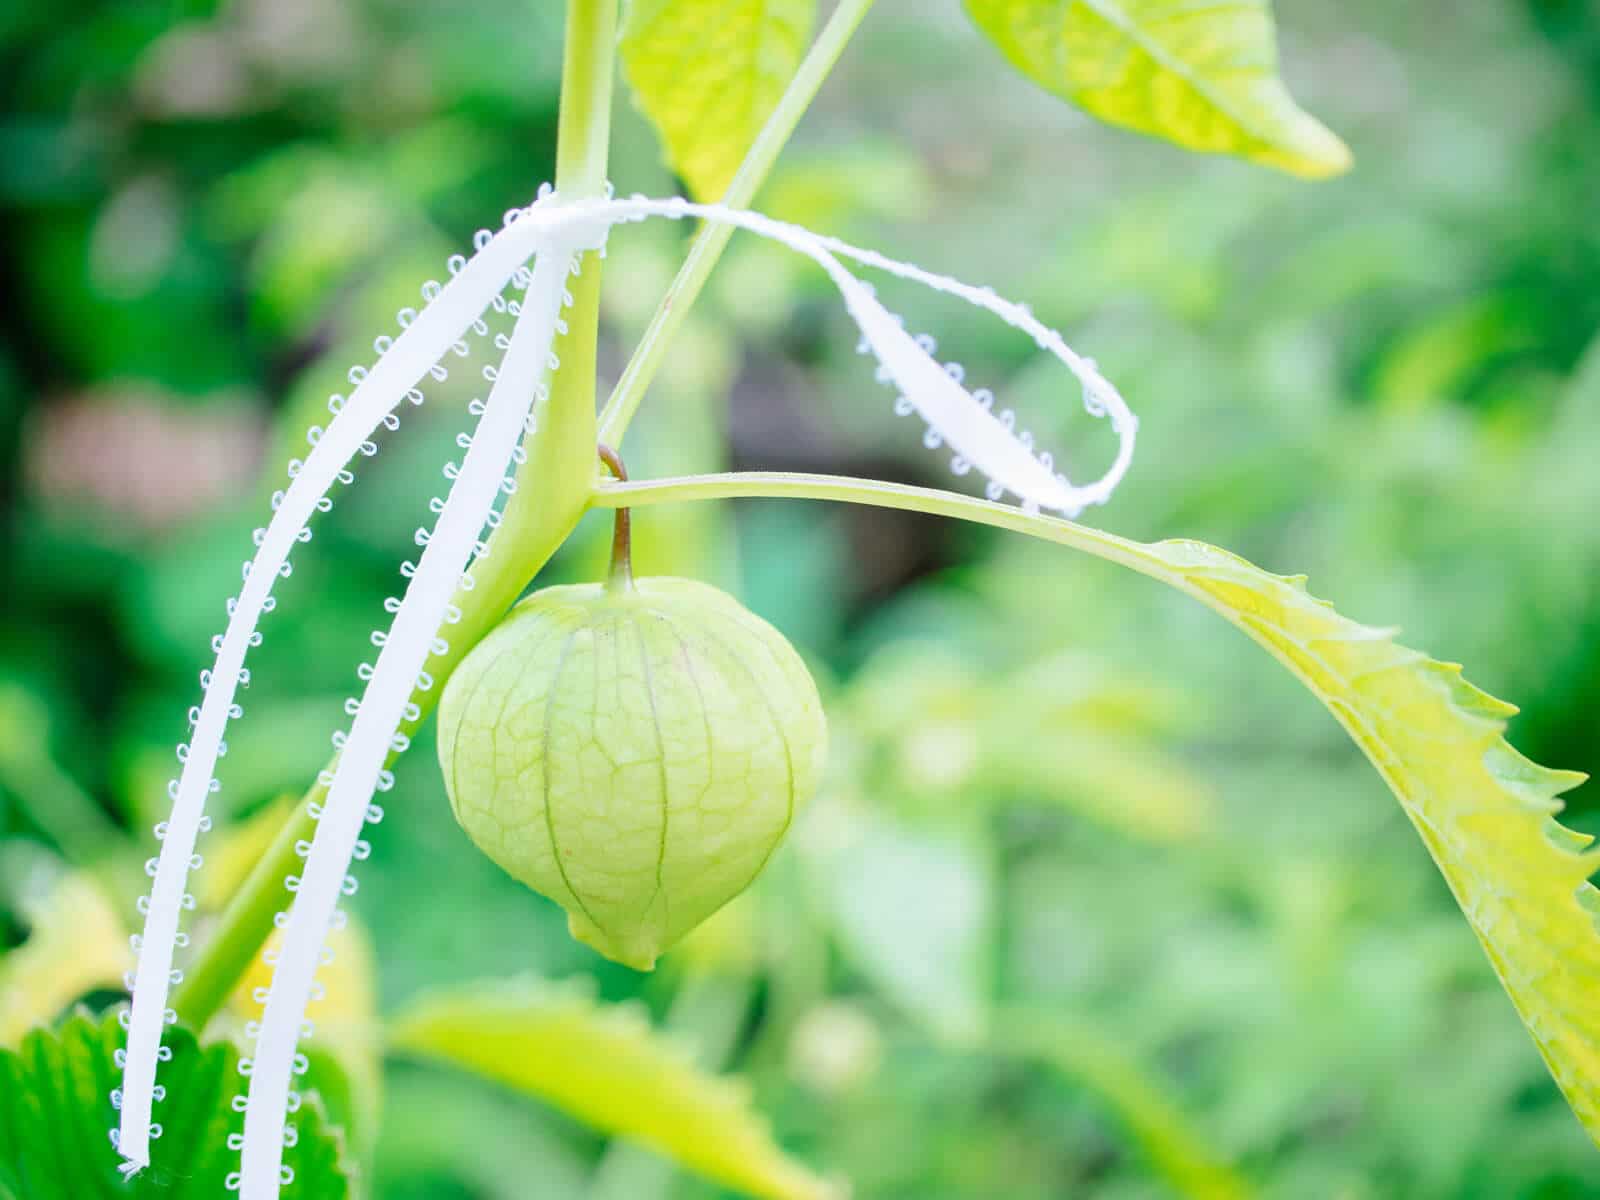 Marking the perfect tomatillo fruit for seed saving